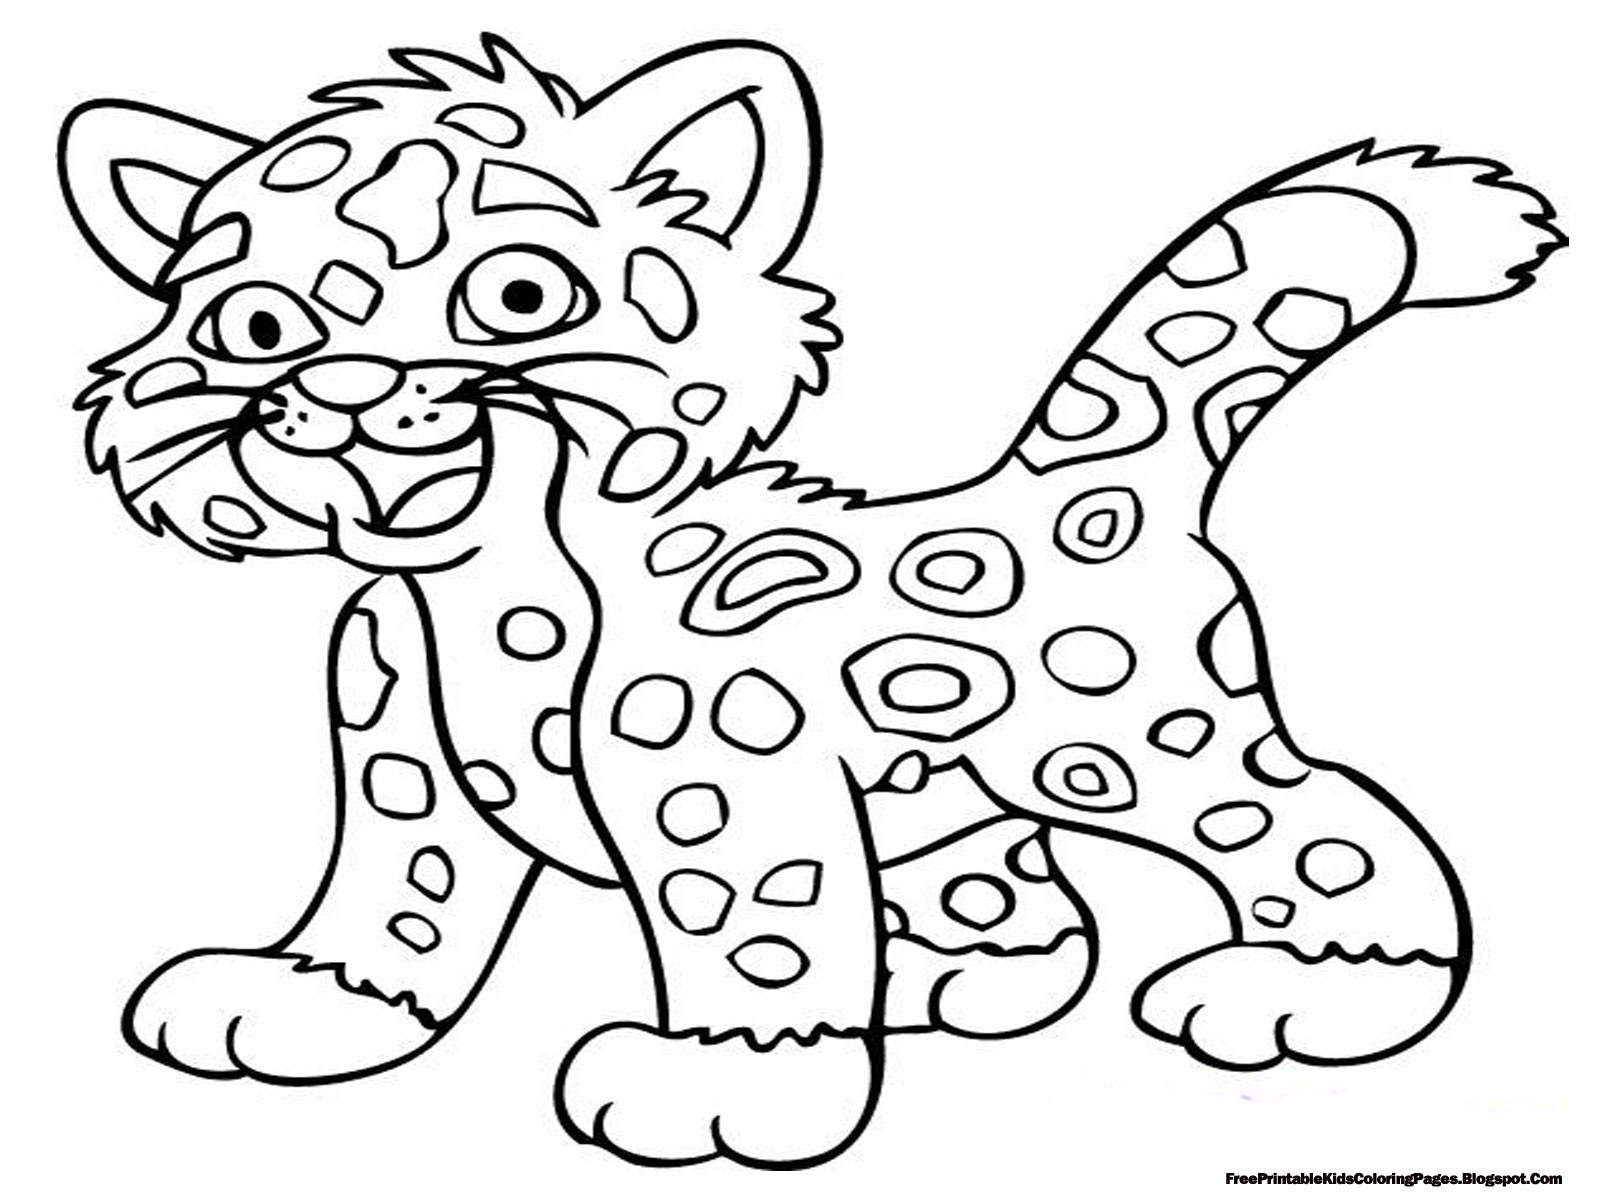 Printable Animal Coloring Pages For Kids
 Jaguar Coloring Pages Free Printable Kids Coloring Pages